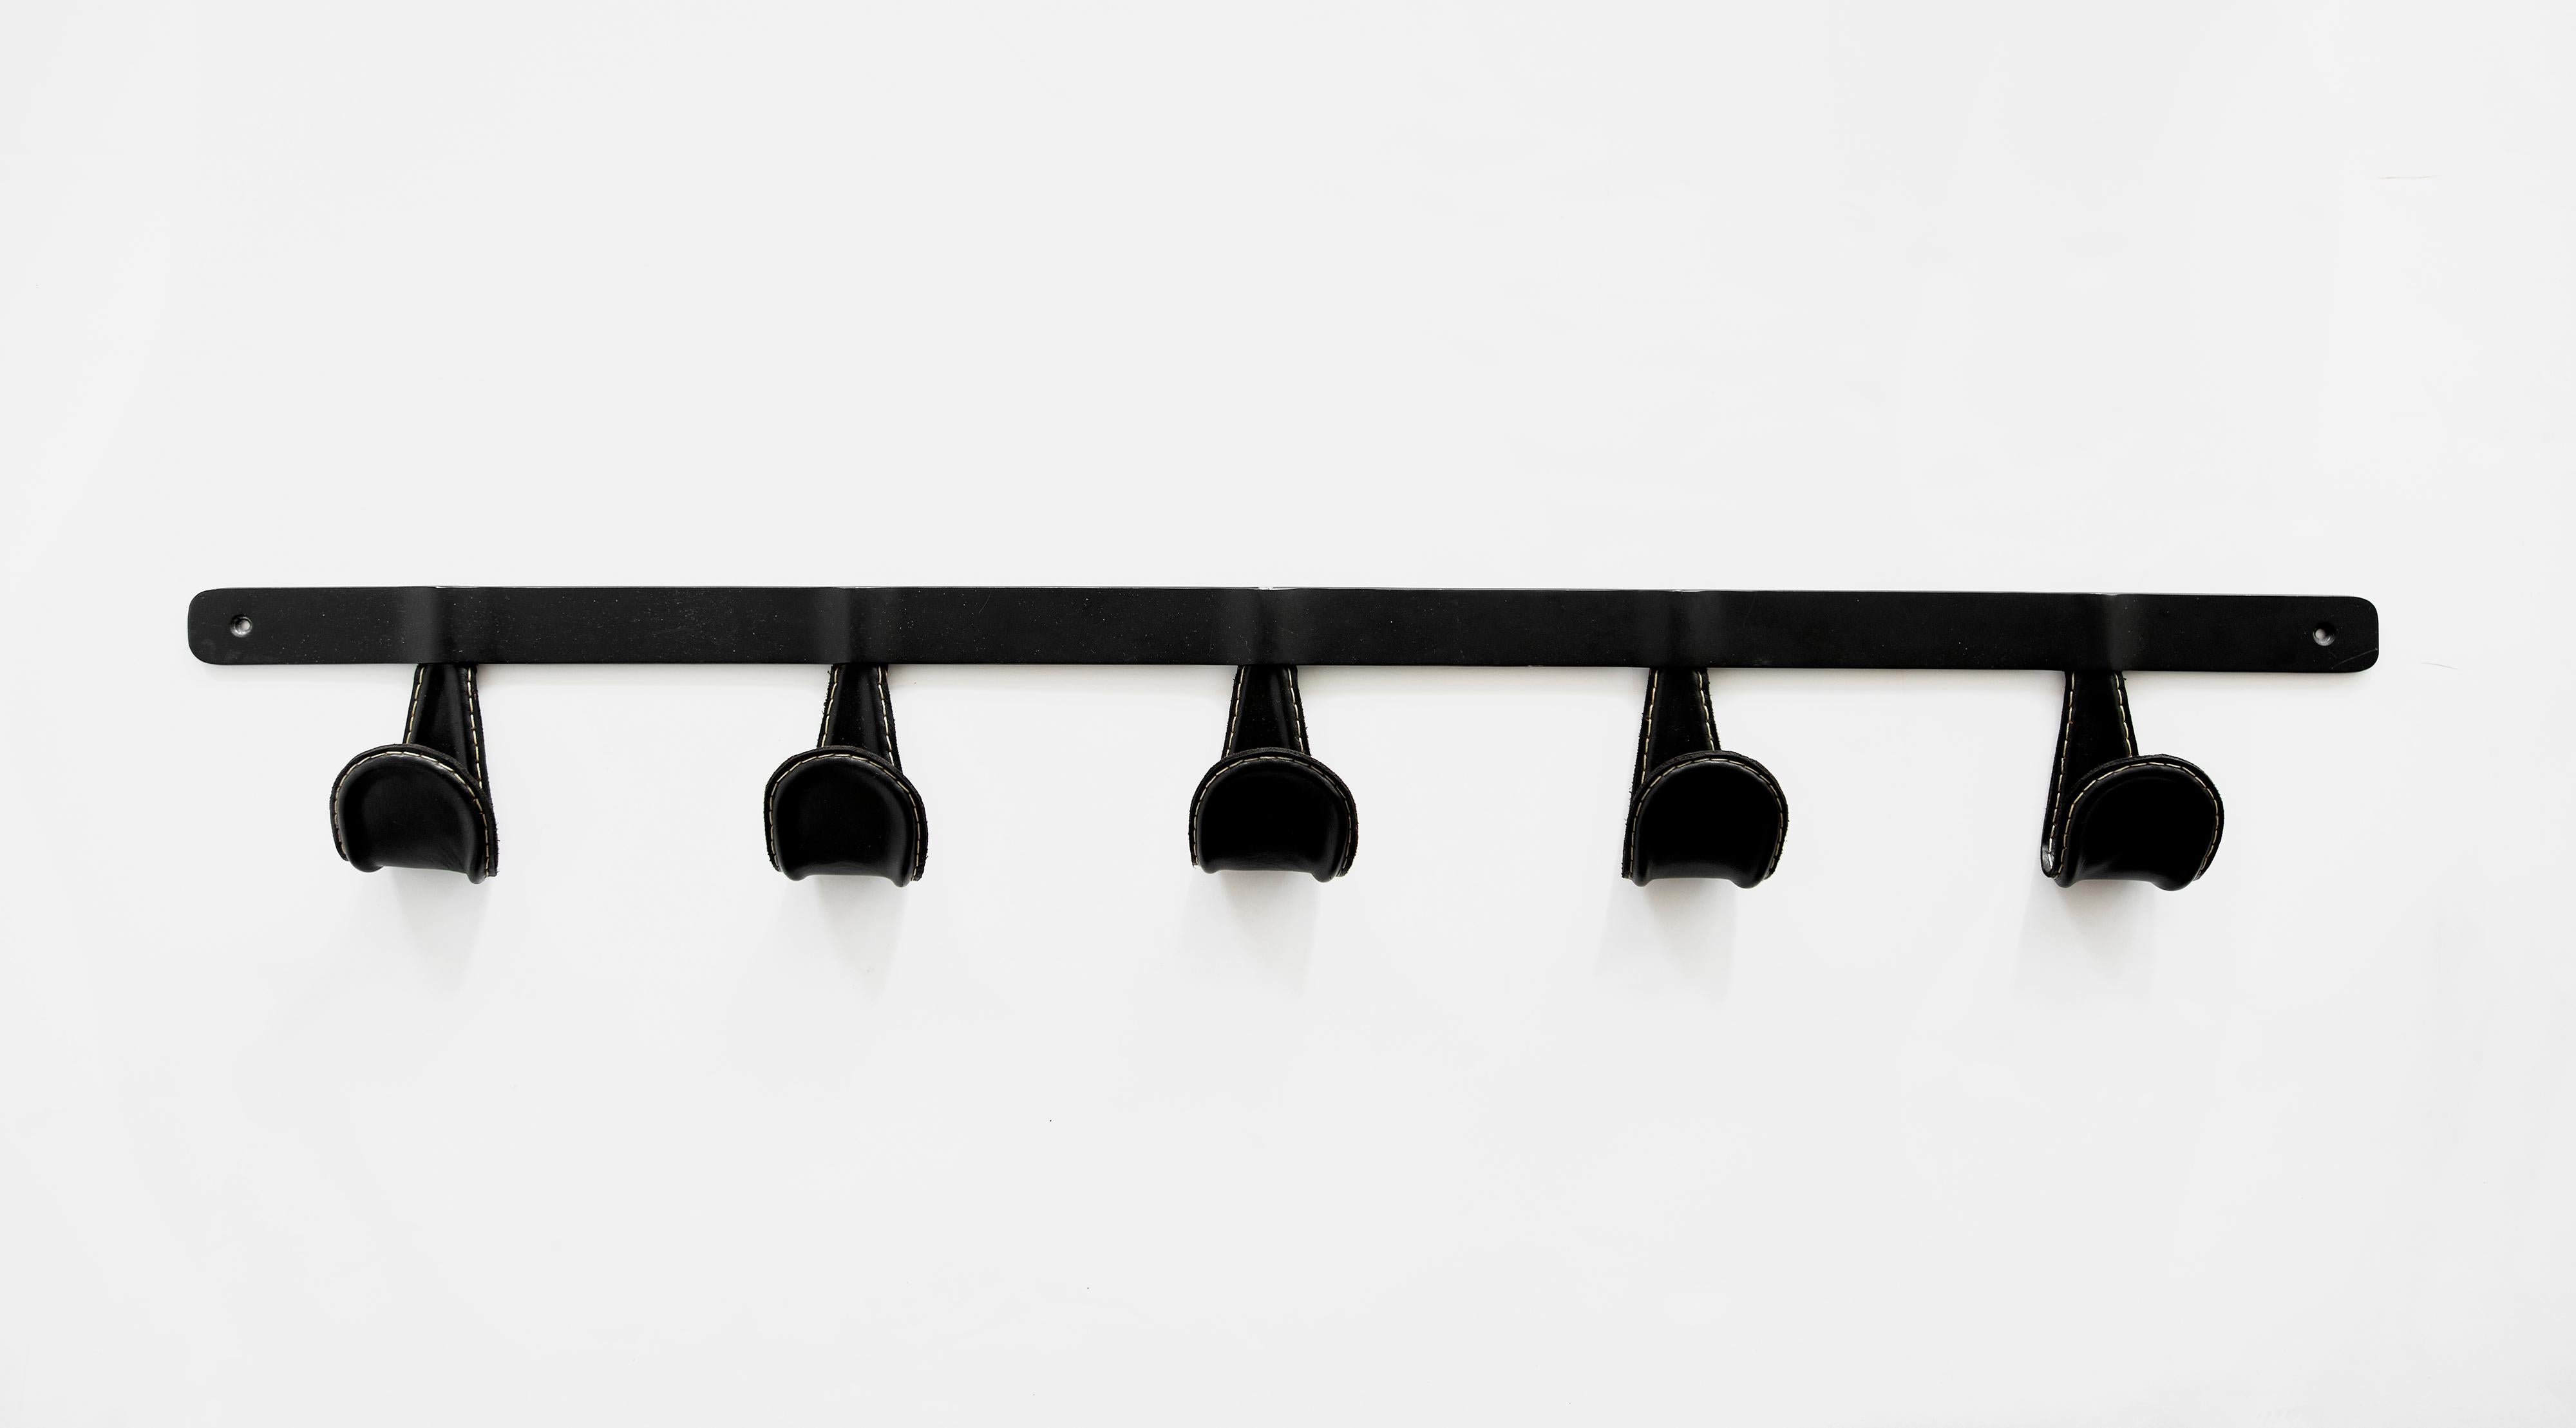 Newly produced iron and leather coat rack. Iron hooks wrapped in black leather with contrast stitching. Leather options available.